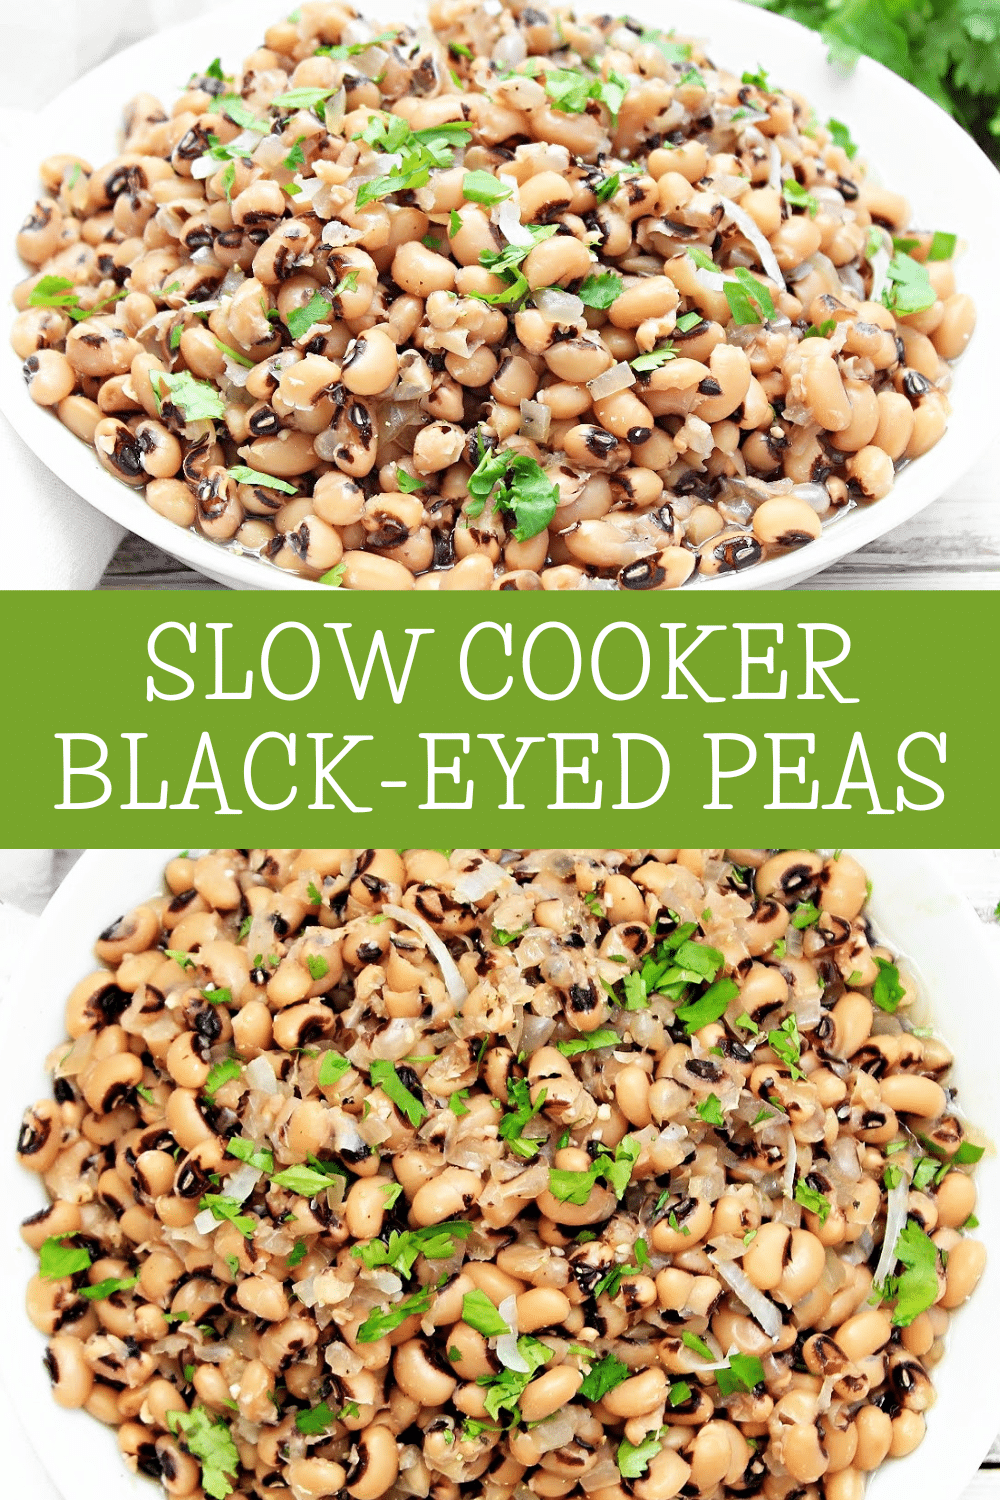 Slow Cooker Black-Eyed Peas ~ Dried beans slow simmered in a seasoned and savory broth. Serve over rice for a simple dinner or with greens and cornbread for good luck on New Year's Day!  via @thiswifecooks